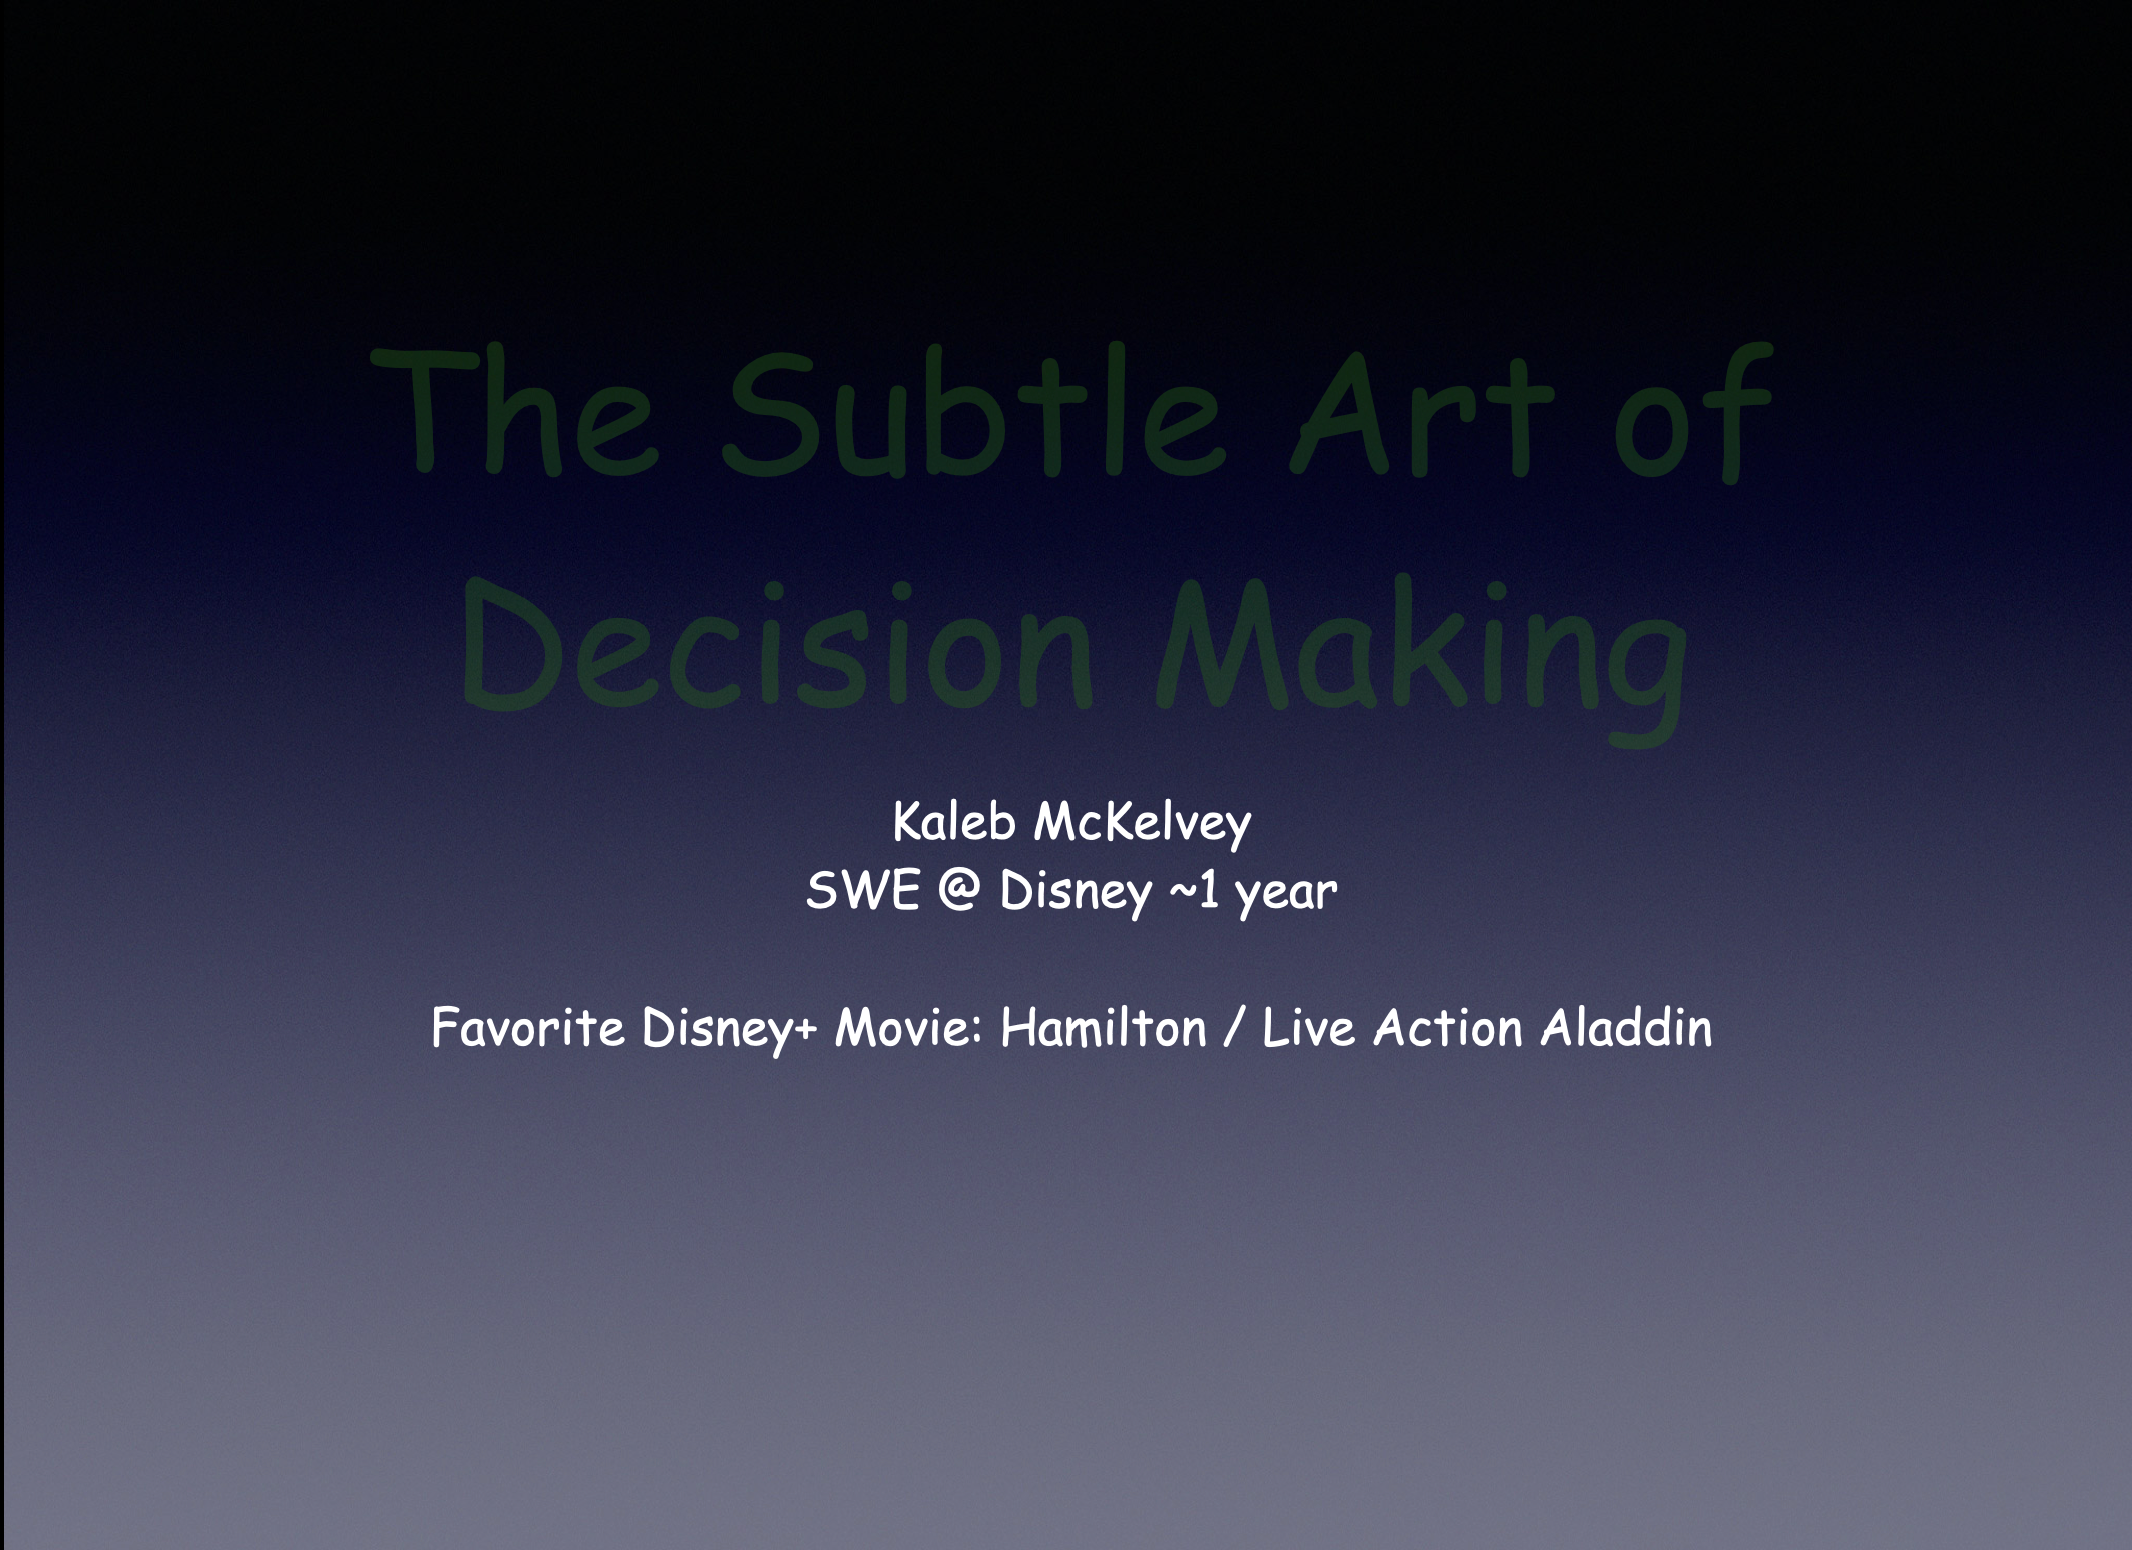 The first slide of the presentation with the name The Subtle Art of Decision Making